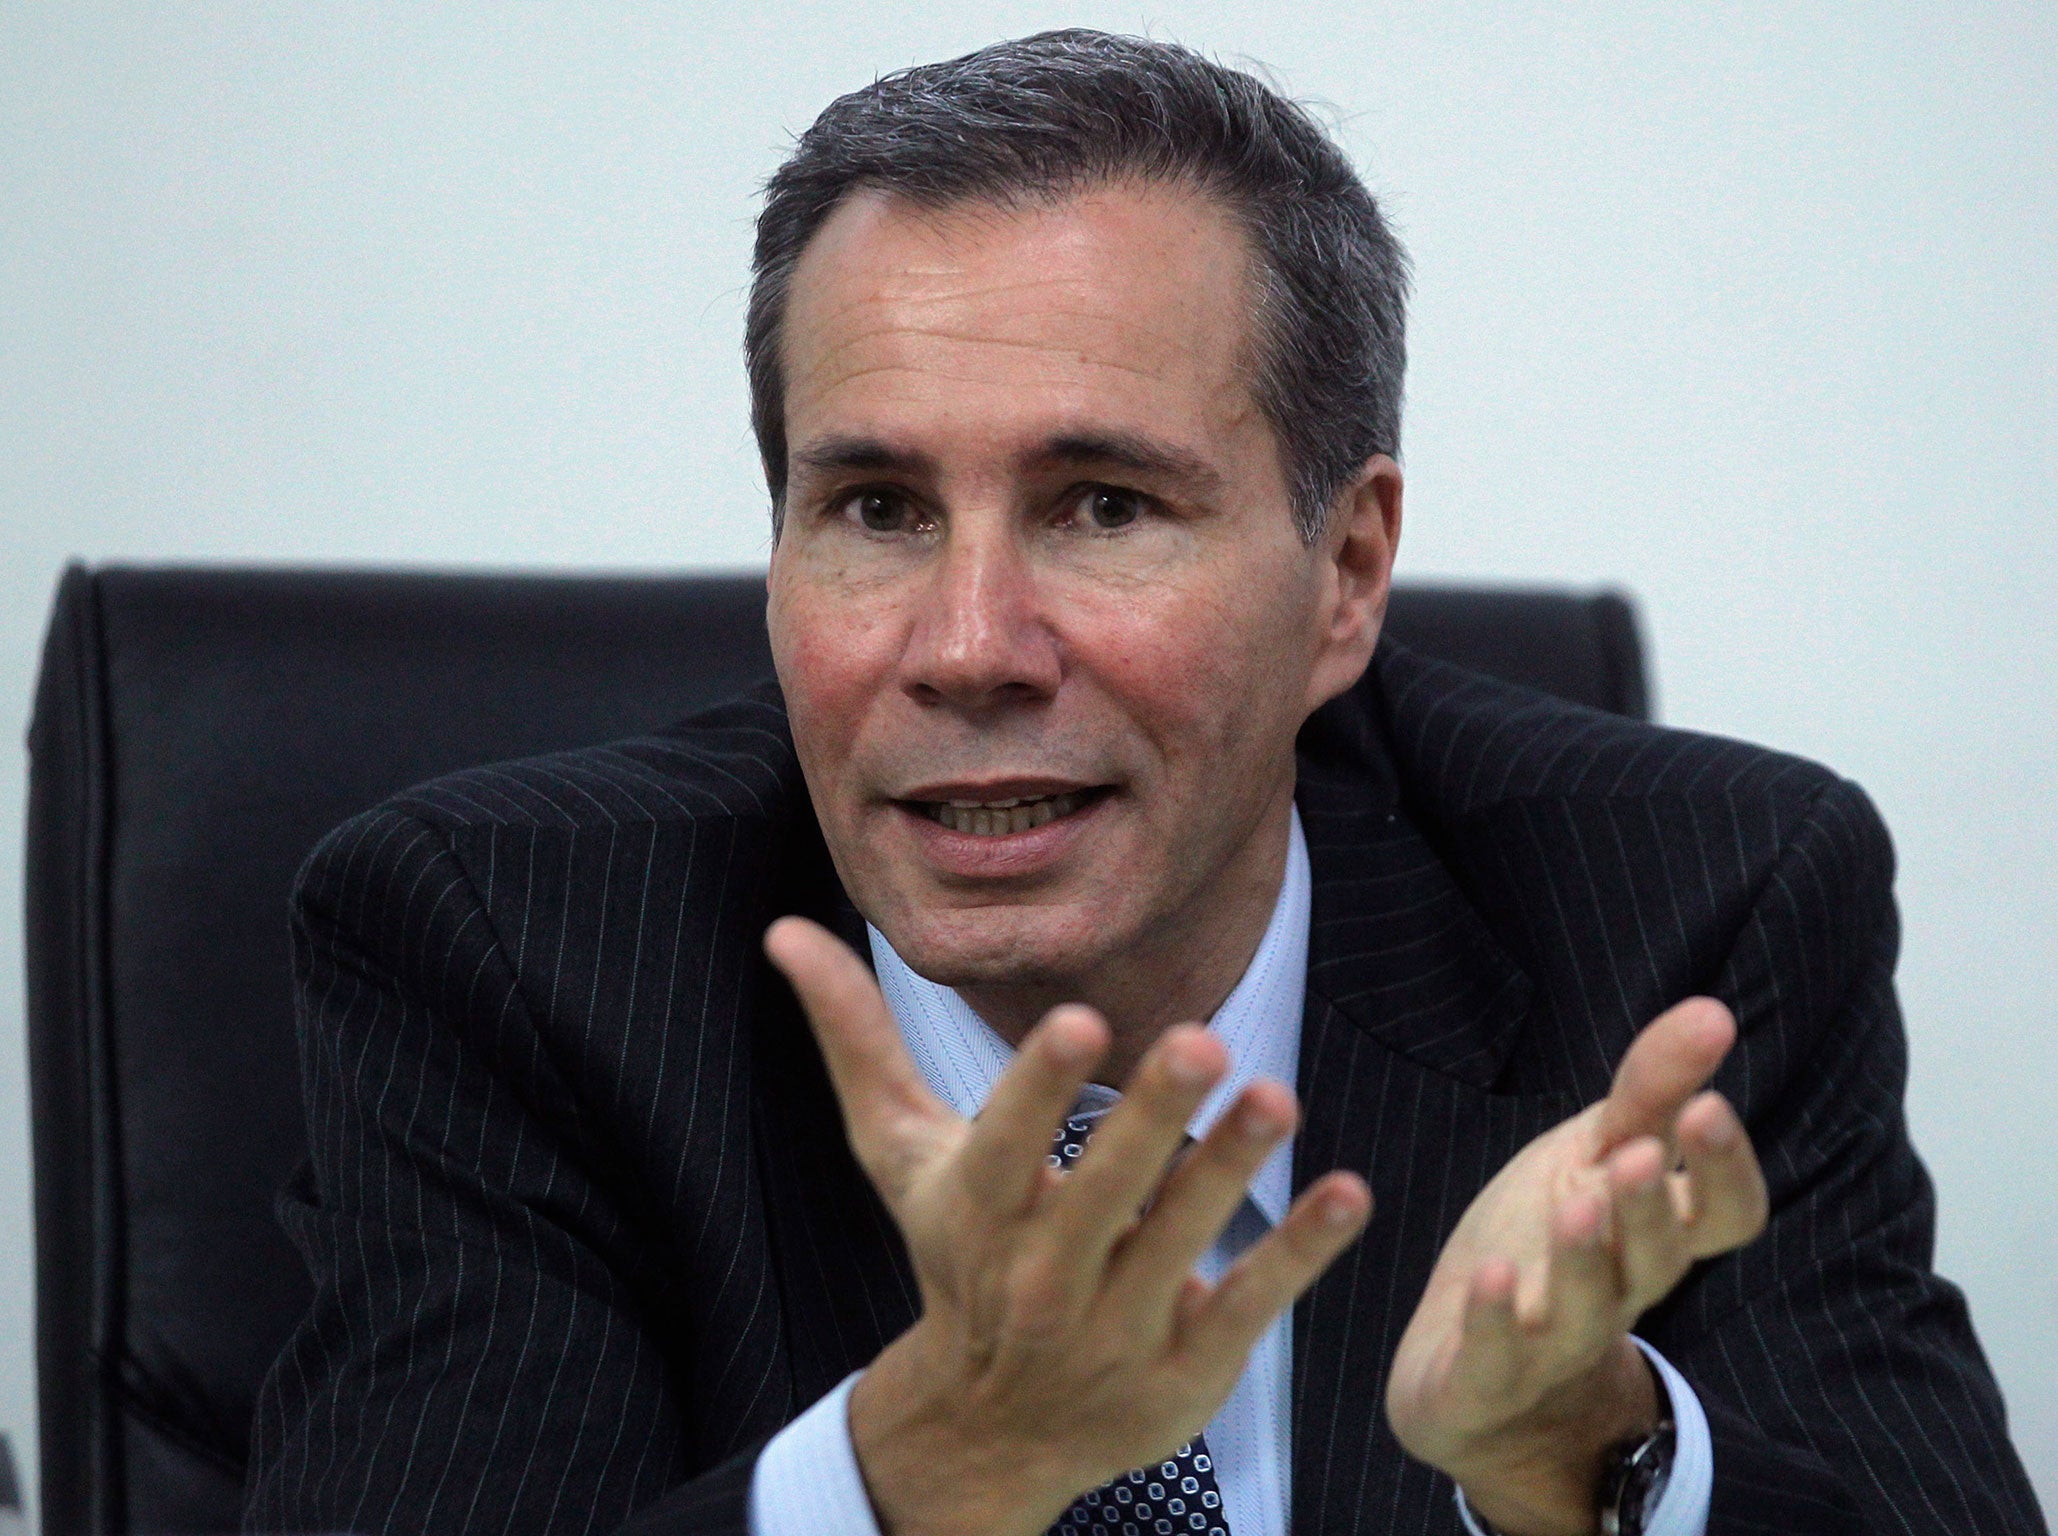 Prosecutor Alberto Nisman had accused Argentina's president of covering up an inquiry into the 1994 bombing